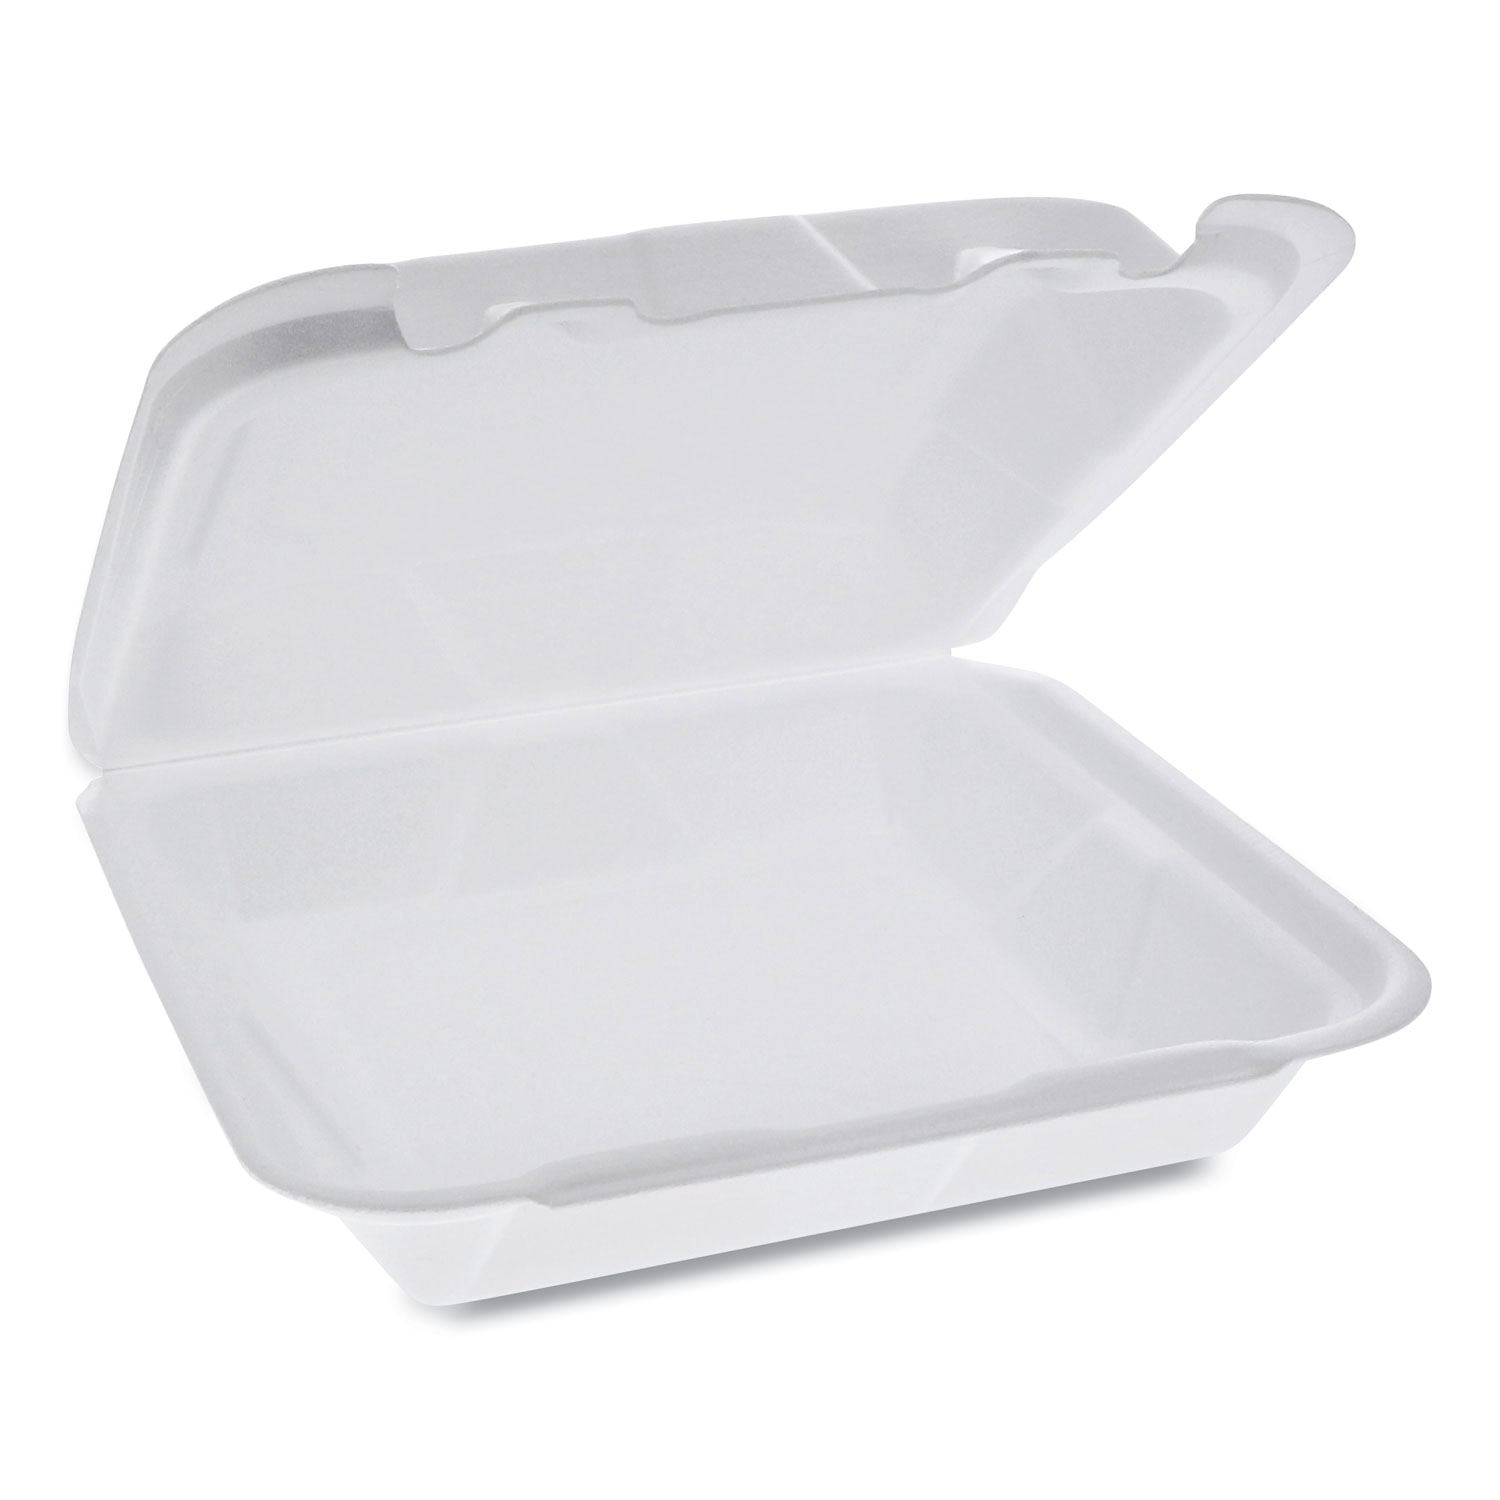  Pactiv YHD18SS00200 Foam Hinged Lid Containers, Dual Tab Lock Happy Face, 8 x 7.75 x 2.25, 1-Compartment, White, 200/Carton (PCTYHD18SS00200) 